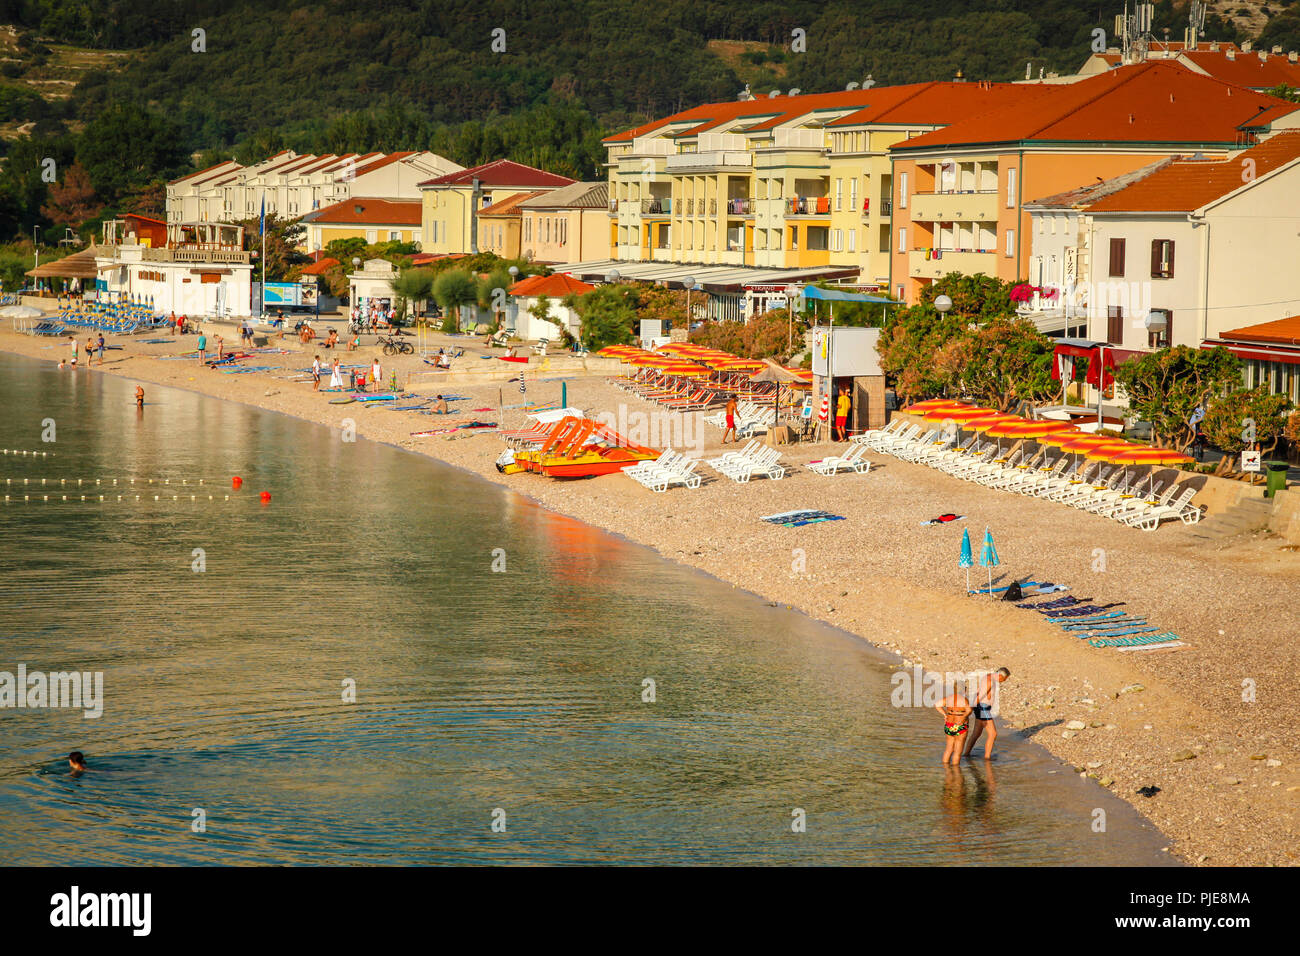 People enjoy the small beach at the hotel lined seaside resort village of Baska on the Croatian island of Krk in the Adriatic Sea Stock Photo